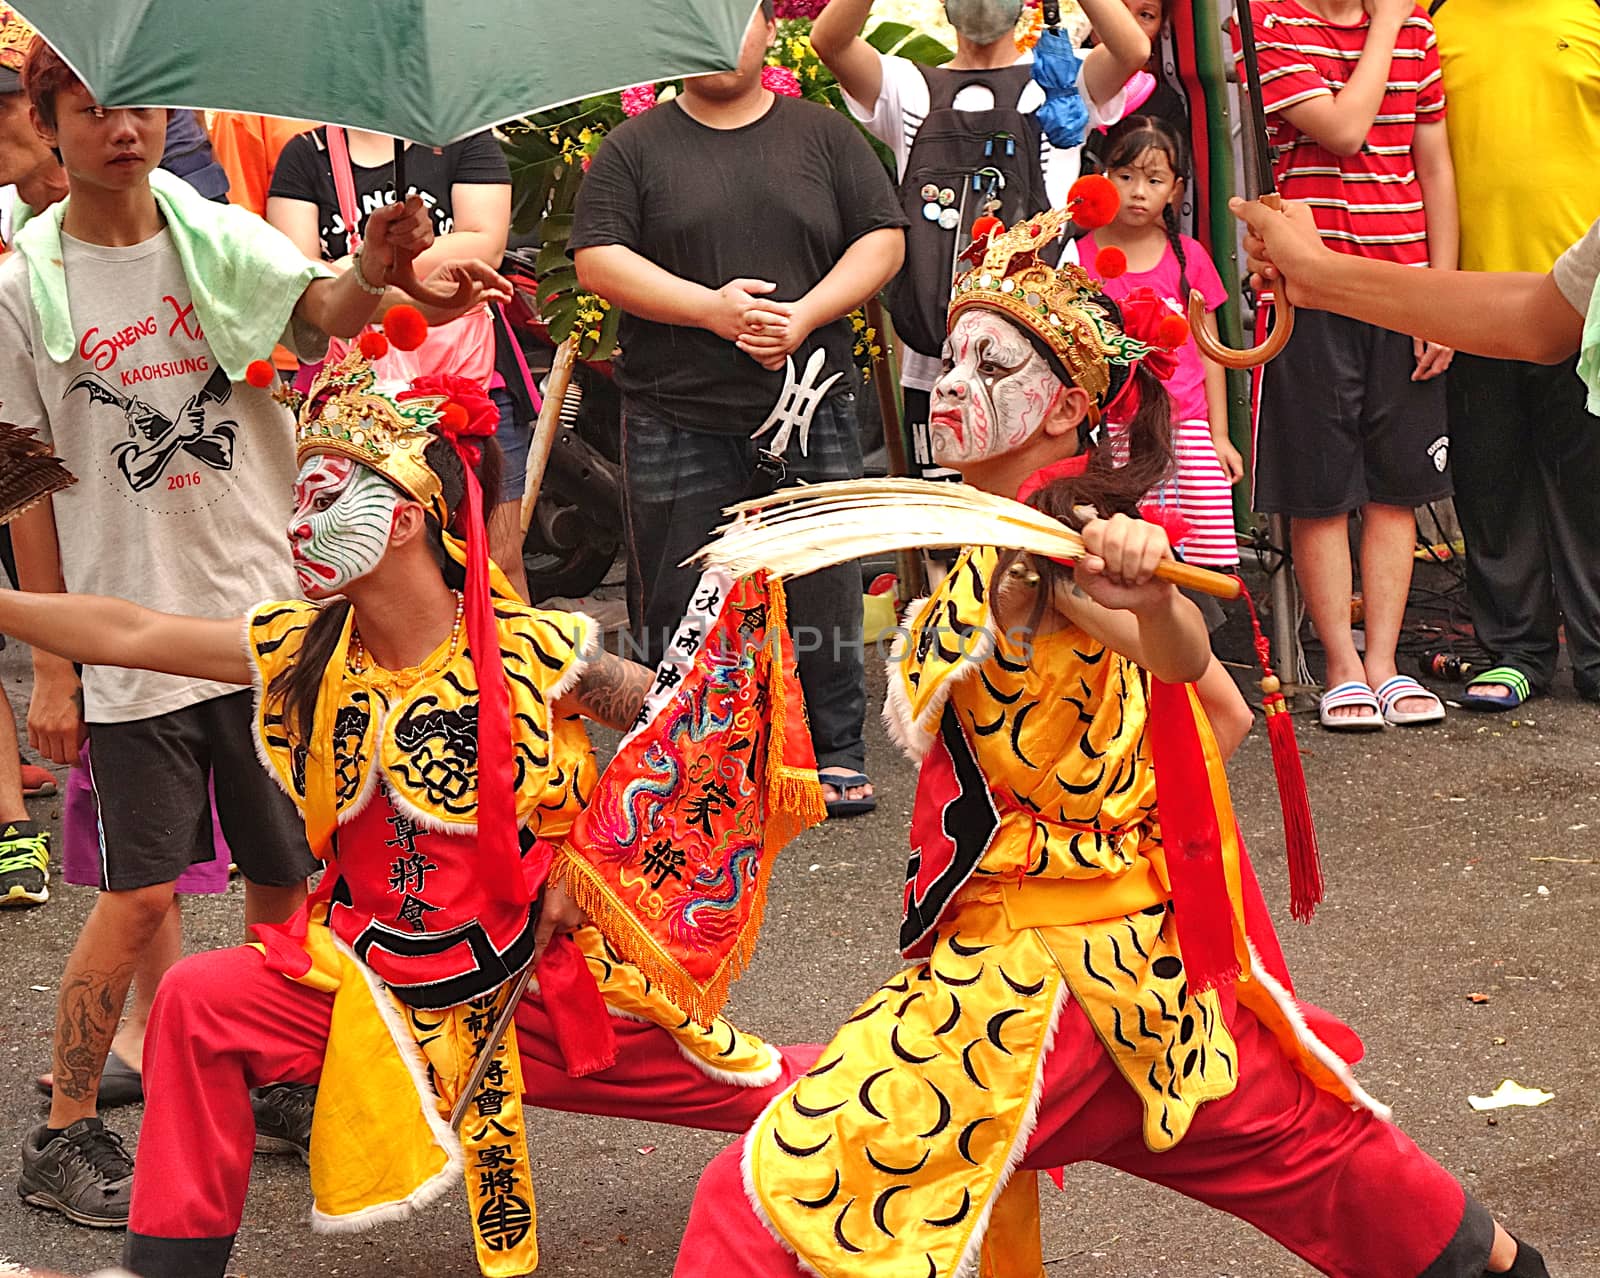 Dancers with Face Painted Masks by shiyali